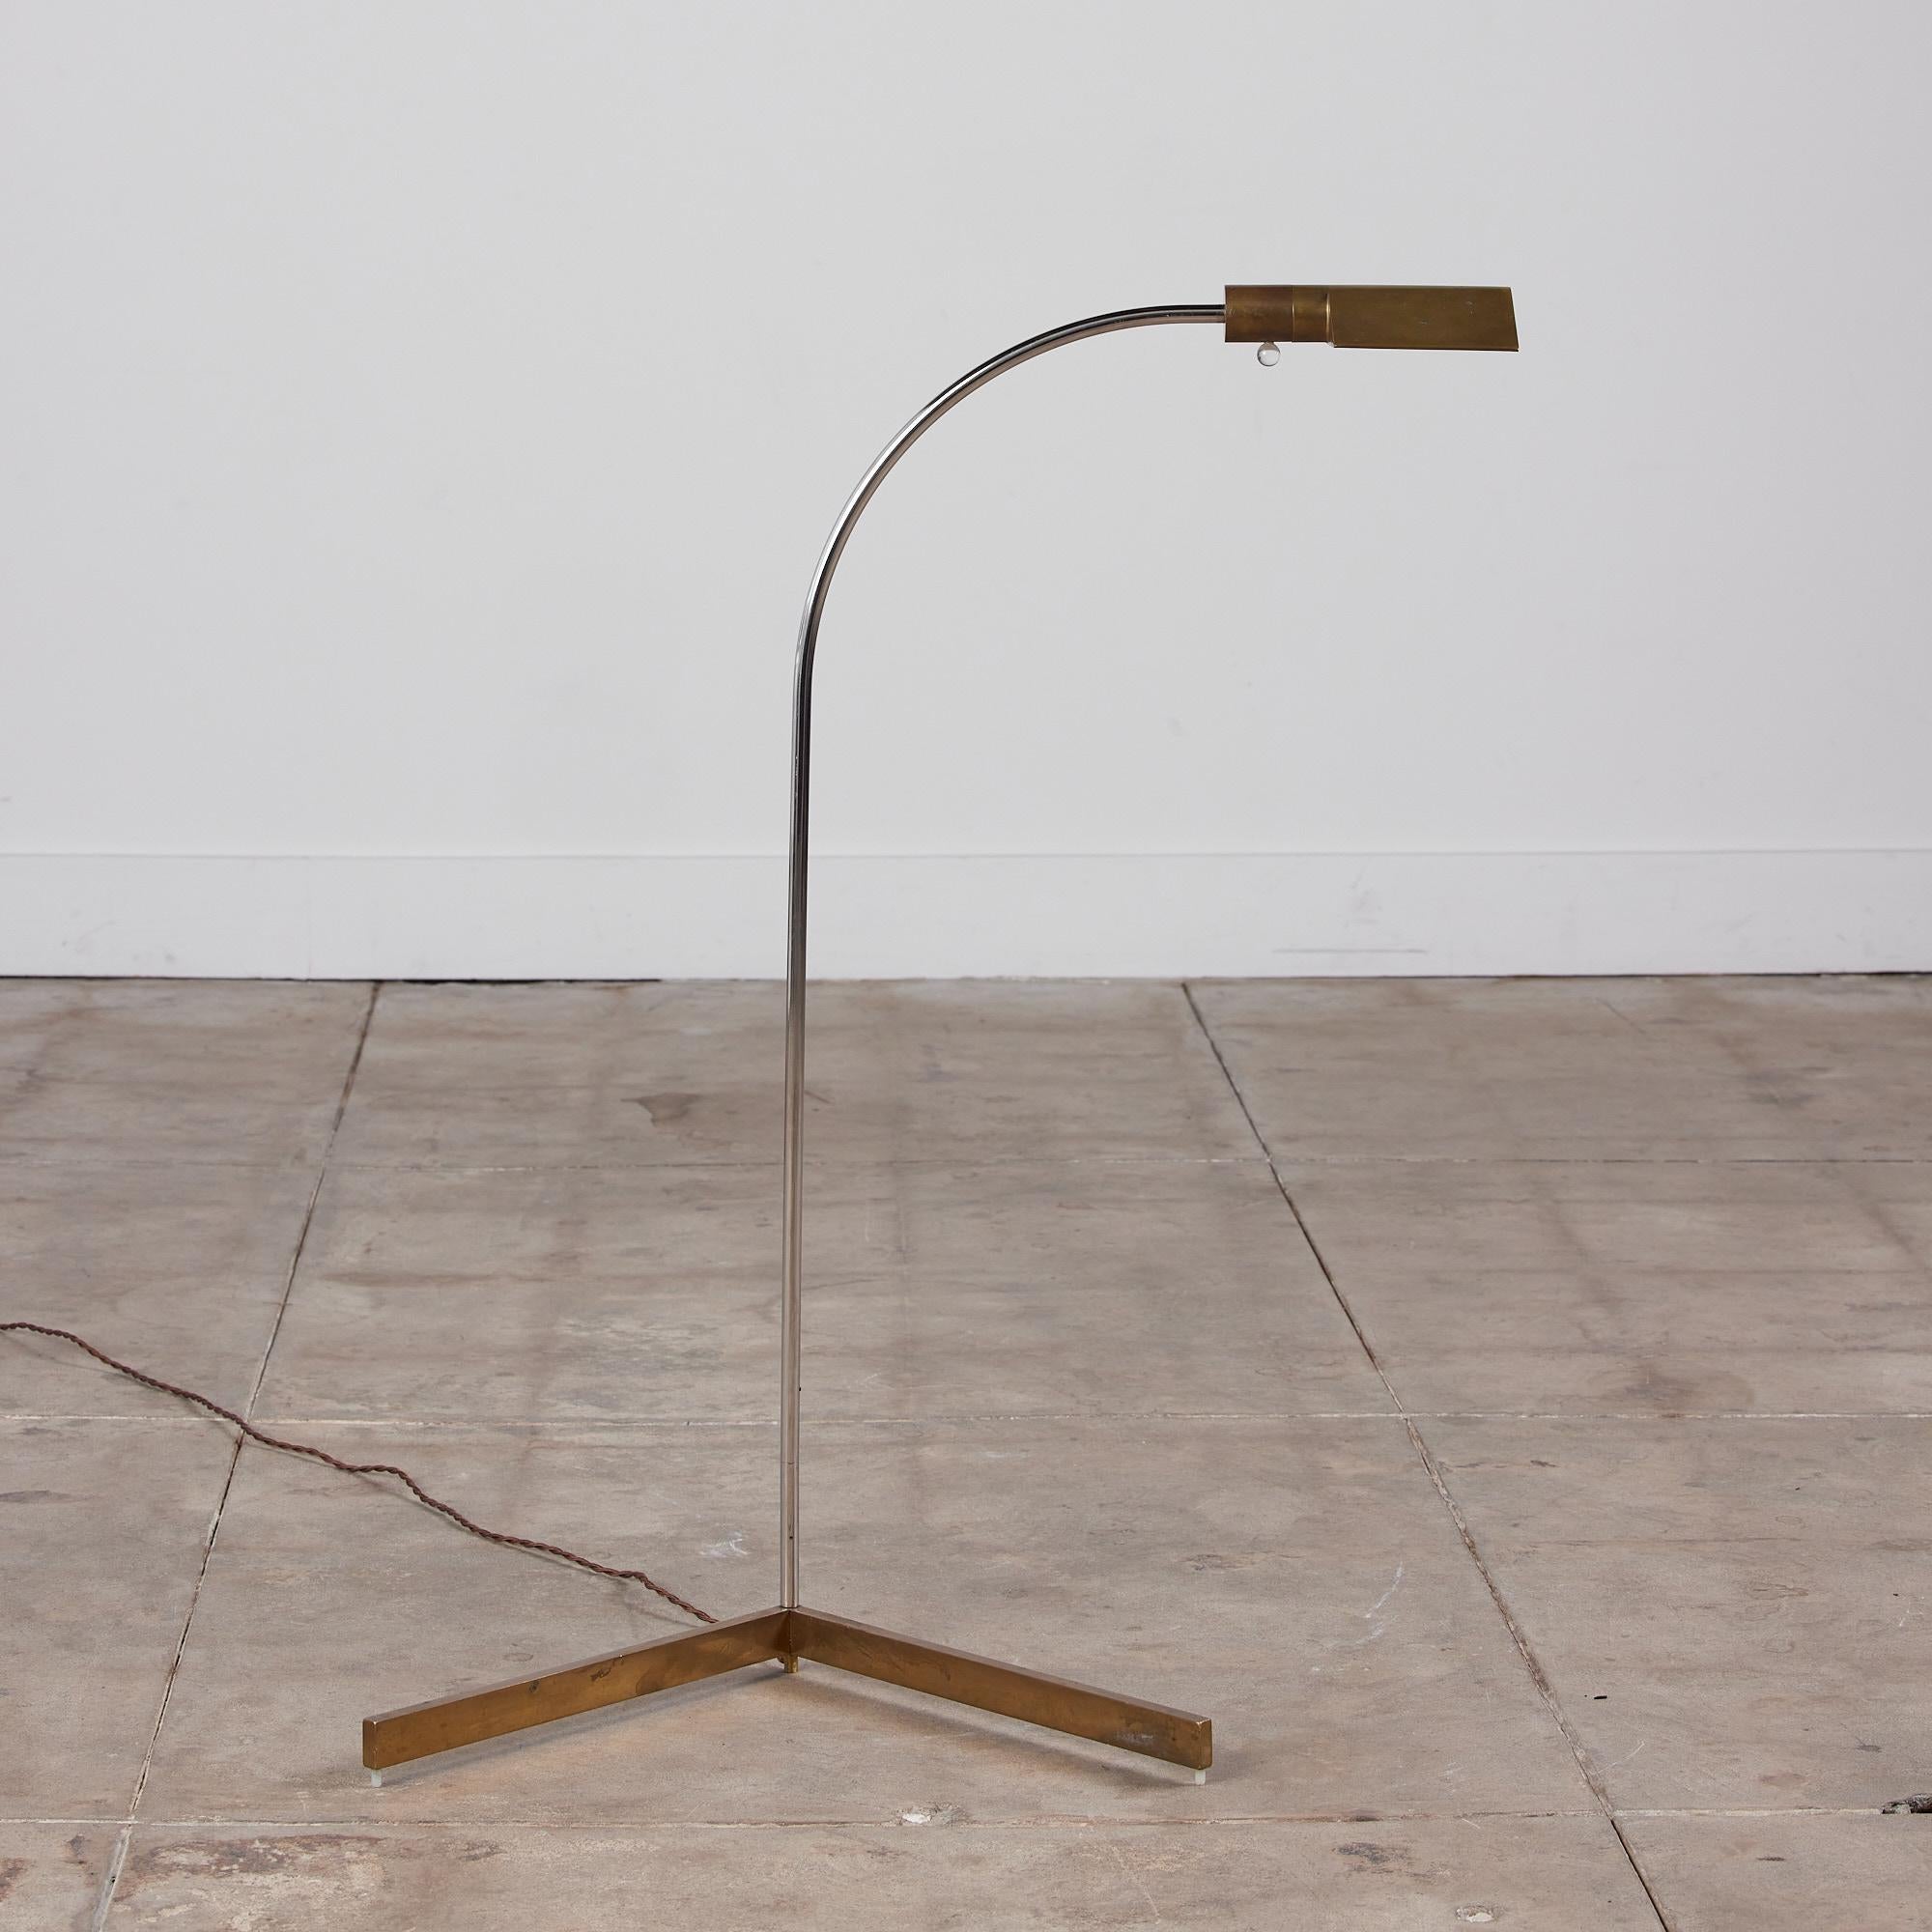 Designed in the 1970s, the brass floor lamps by Cedric Hartman are an enduring design Classic. The modernist floor lamp features a triangular brass shade attached to a curved stem that offers focused task lighting. The arched chrome pole terminates